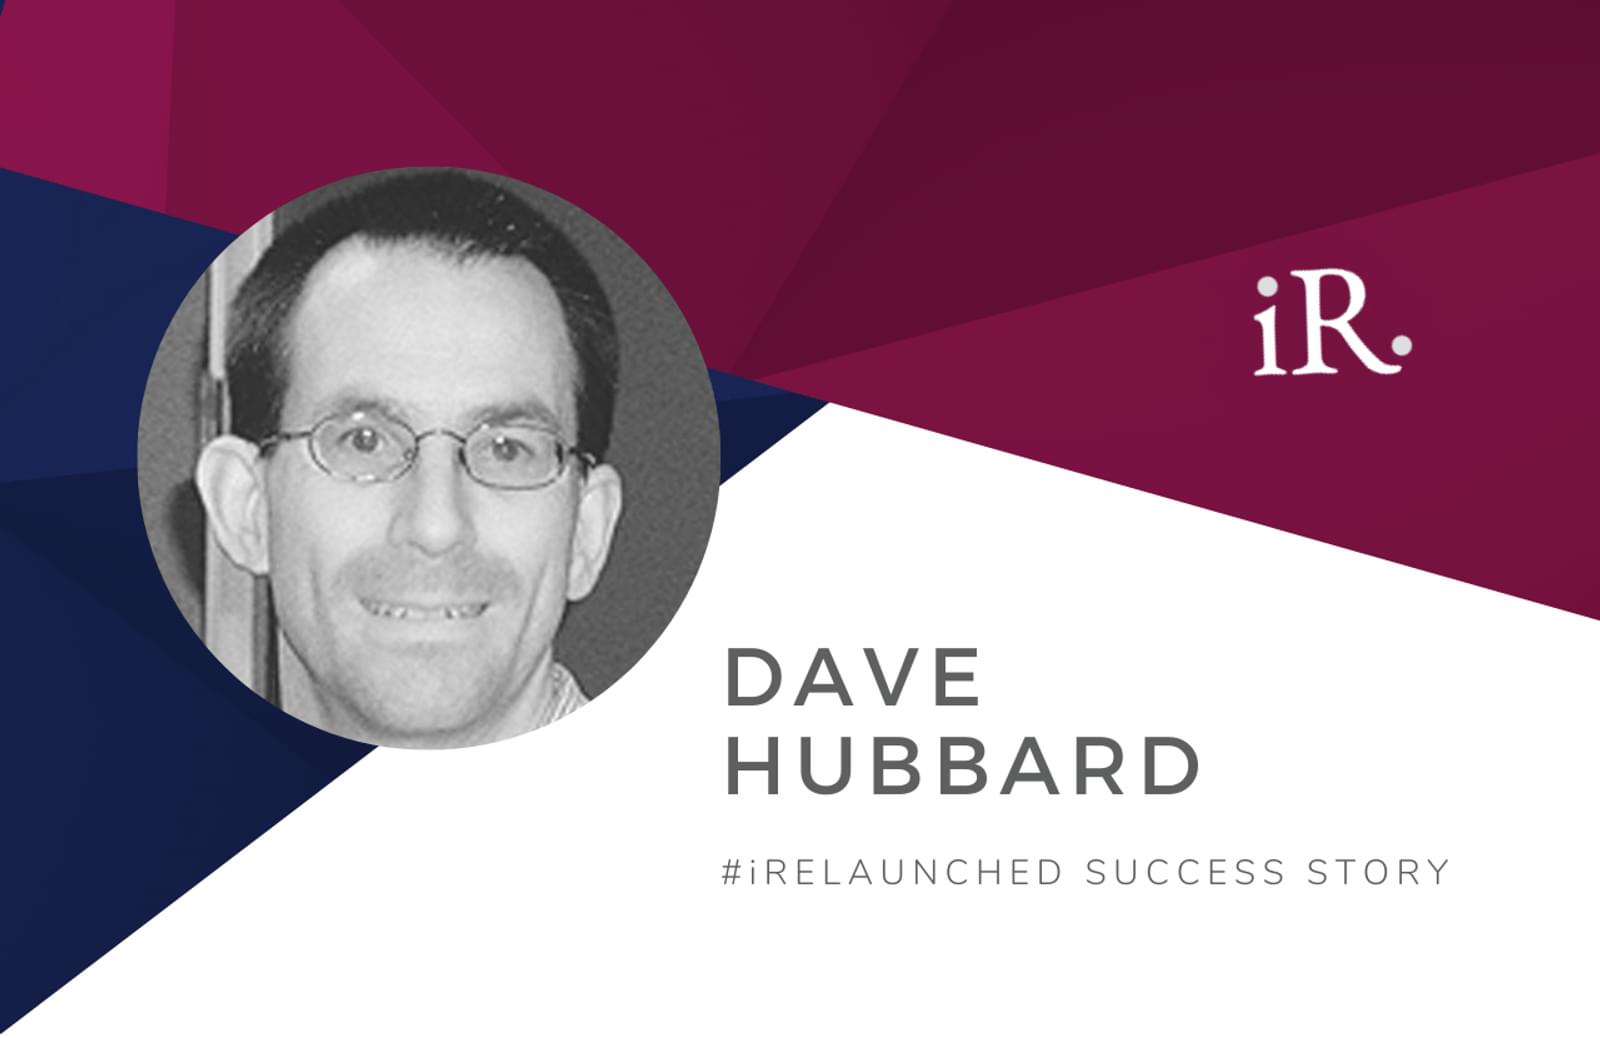 Dave Hubbard's headshot and the text #iRelaunched Success Story along with the iRelaunch logo.  A navy and maroon geometric textured background intersect behind Dave's headshot.